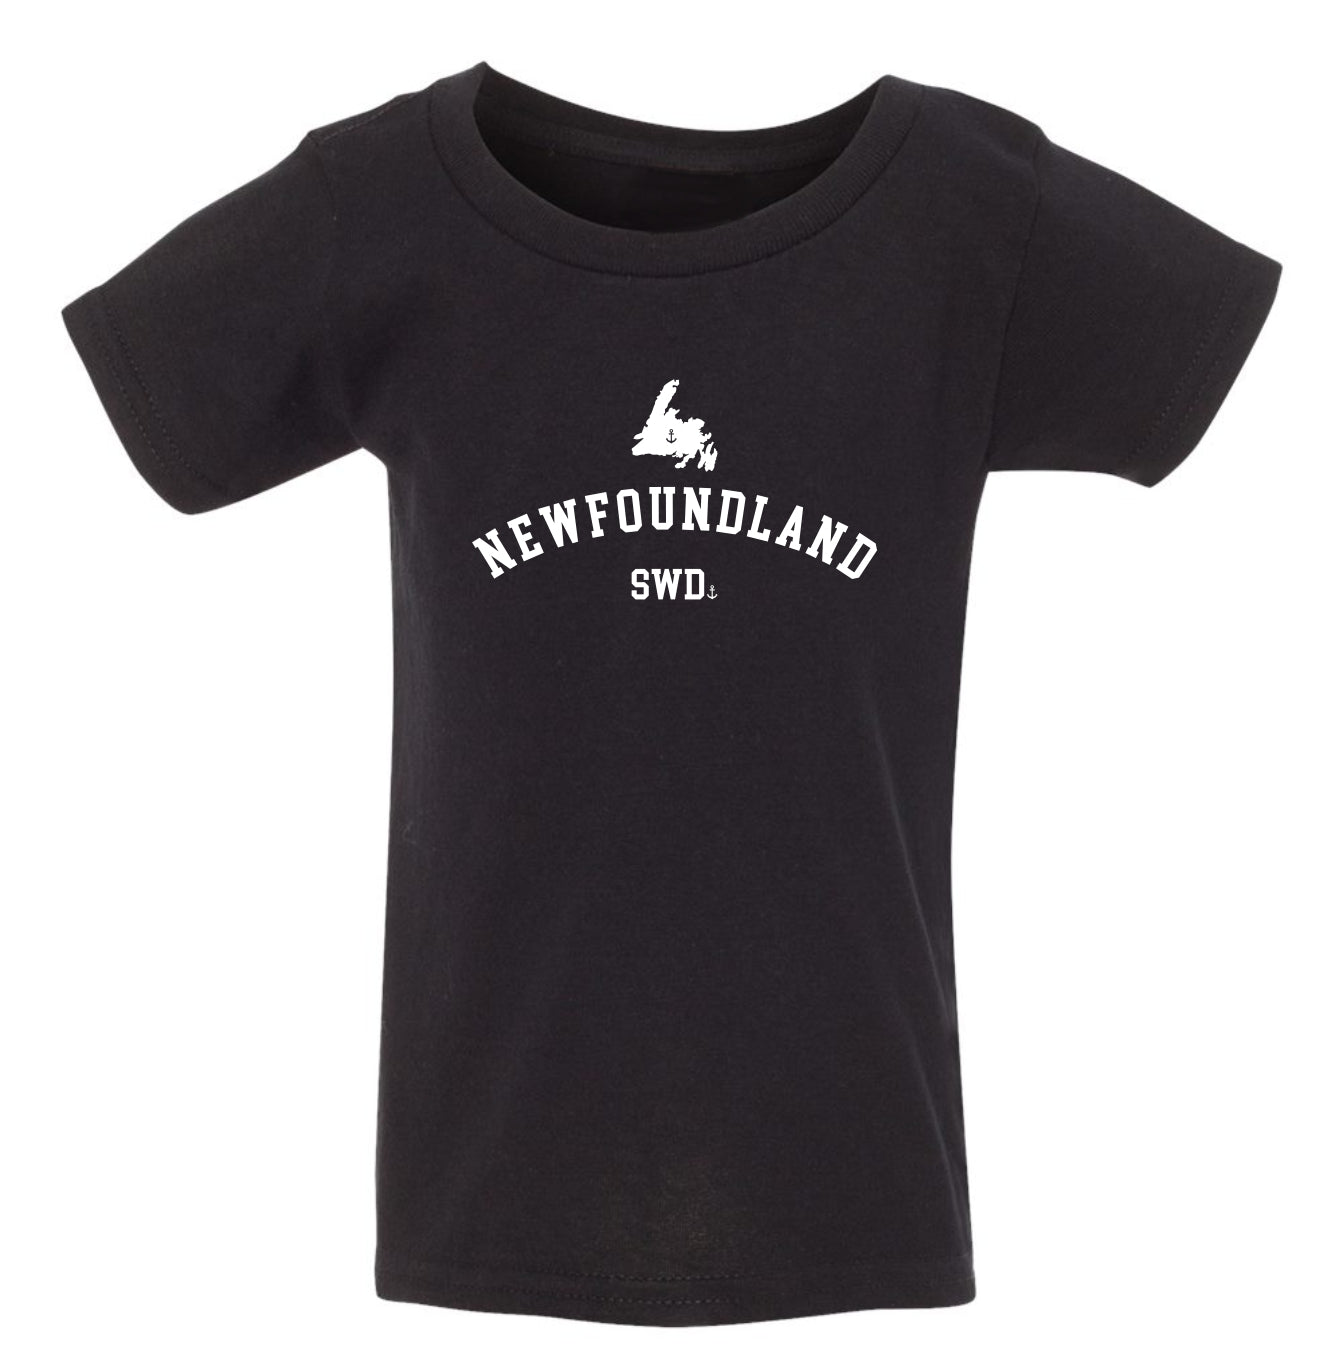 "Newfoundland - SWD" Toddler/Youth T-Shirt